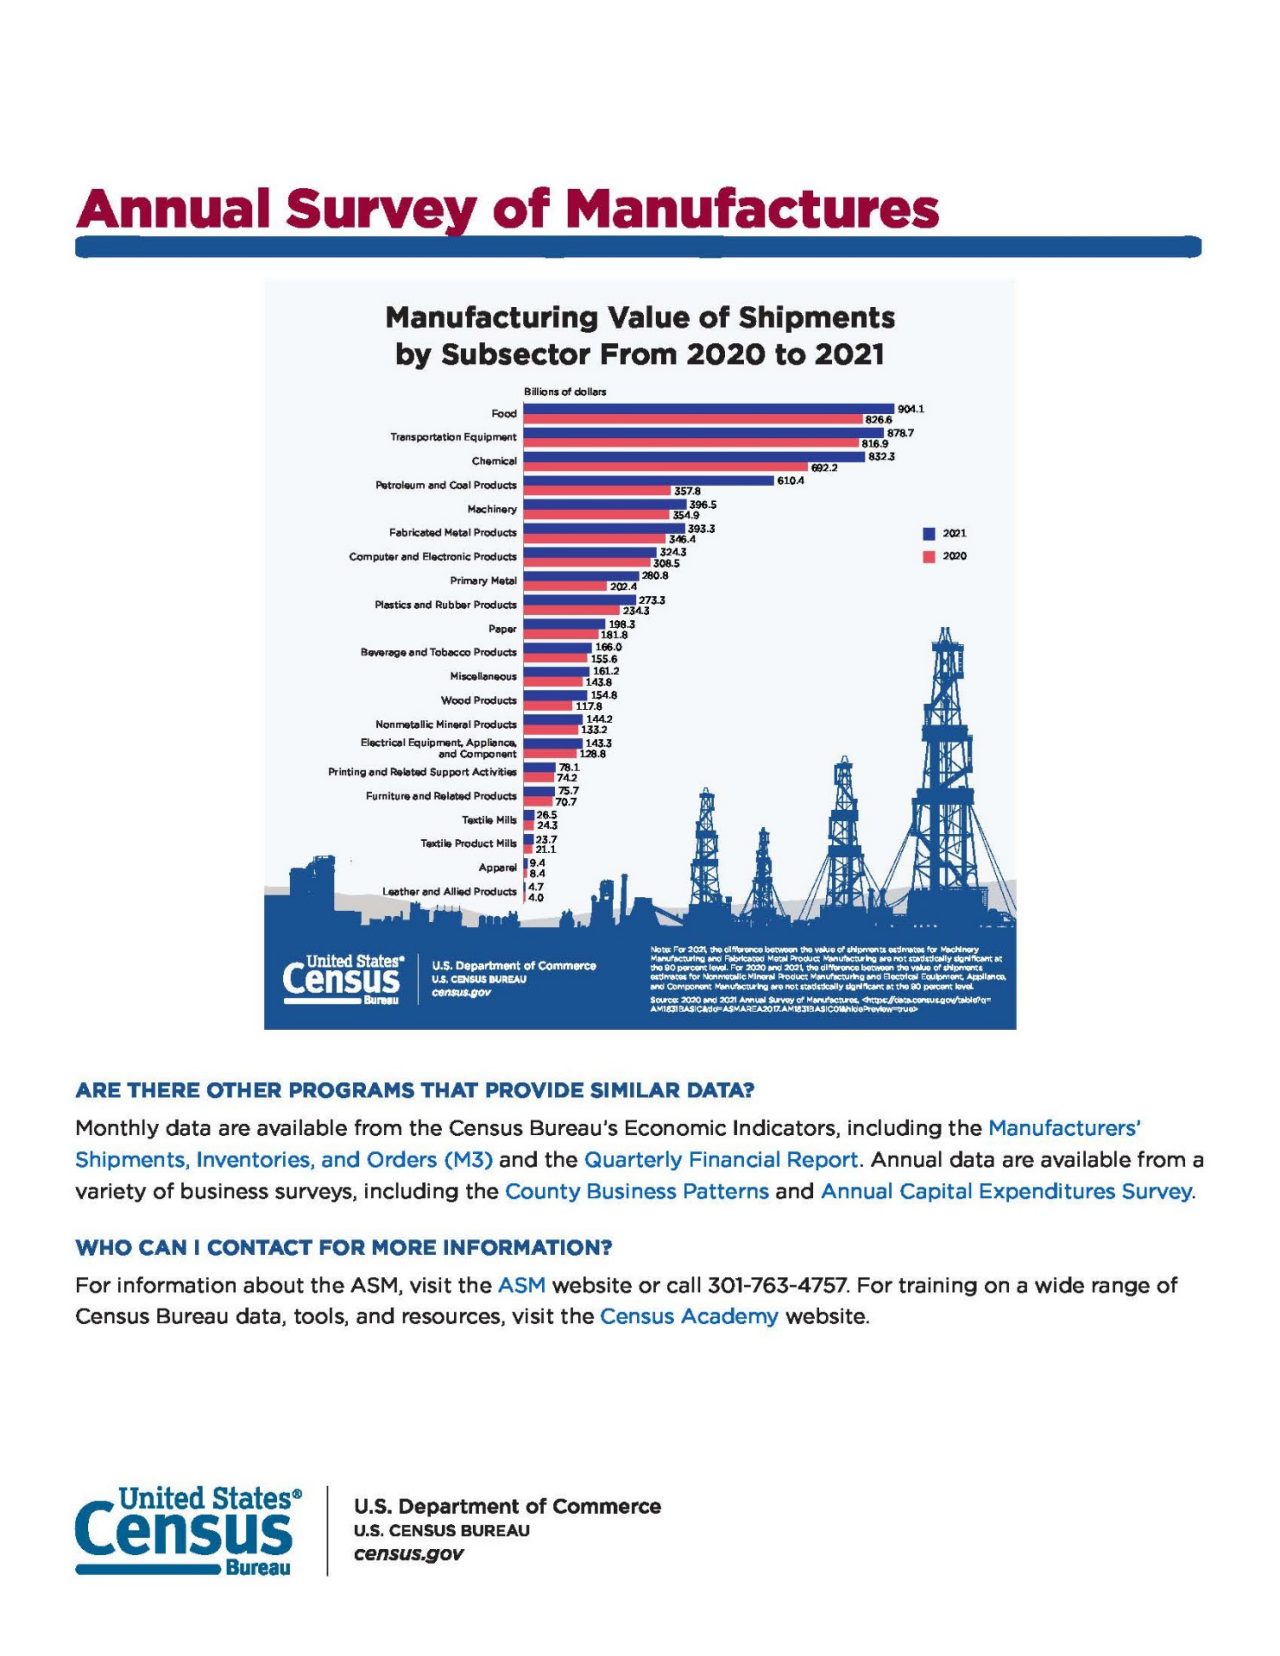 Annual Survey of Manufactures Page 2